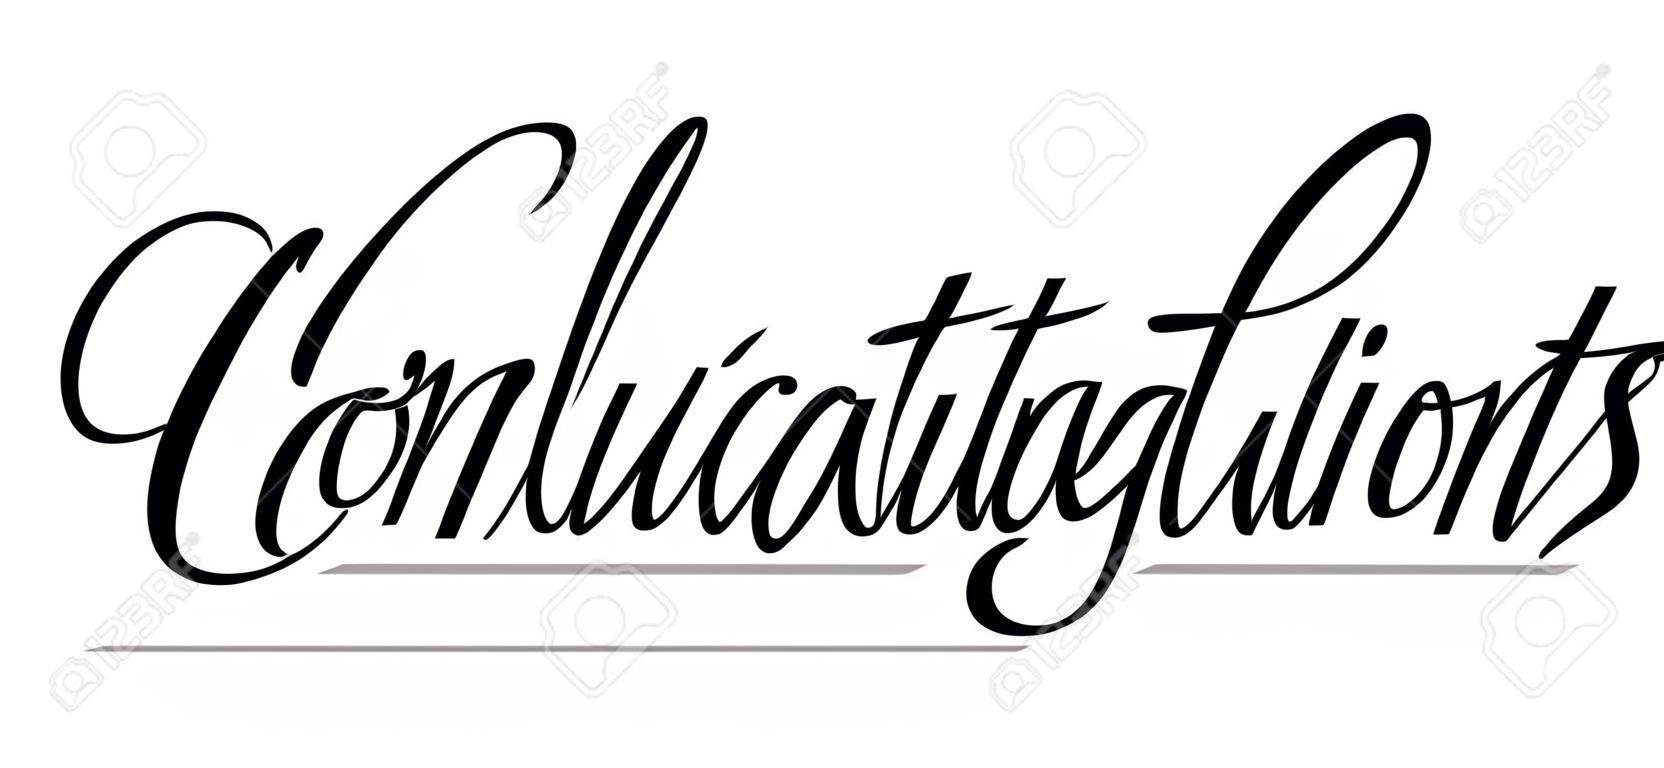 Underscore handwritten text "Congratulations" with shadow. Hand drawn calligraphy lettering